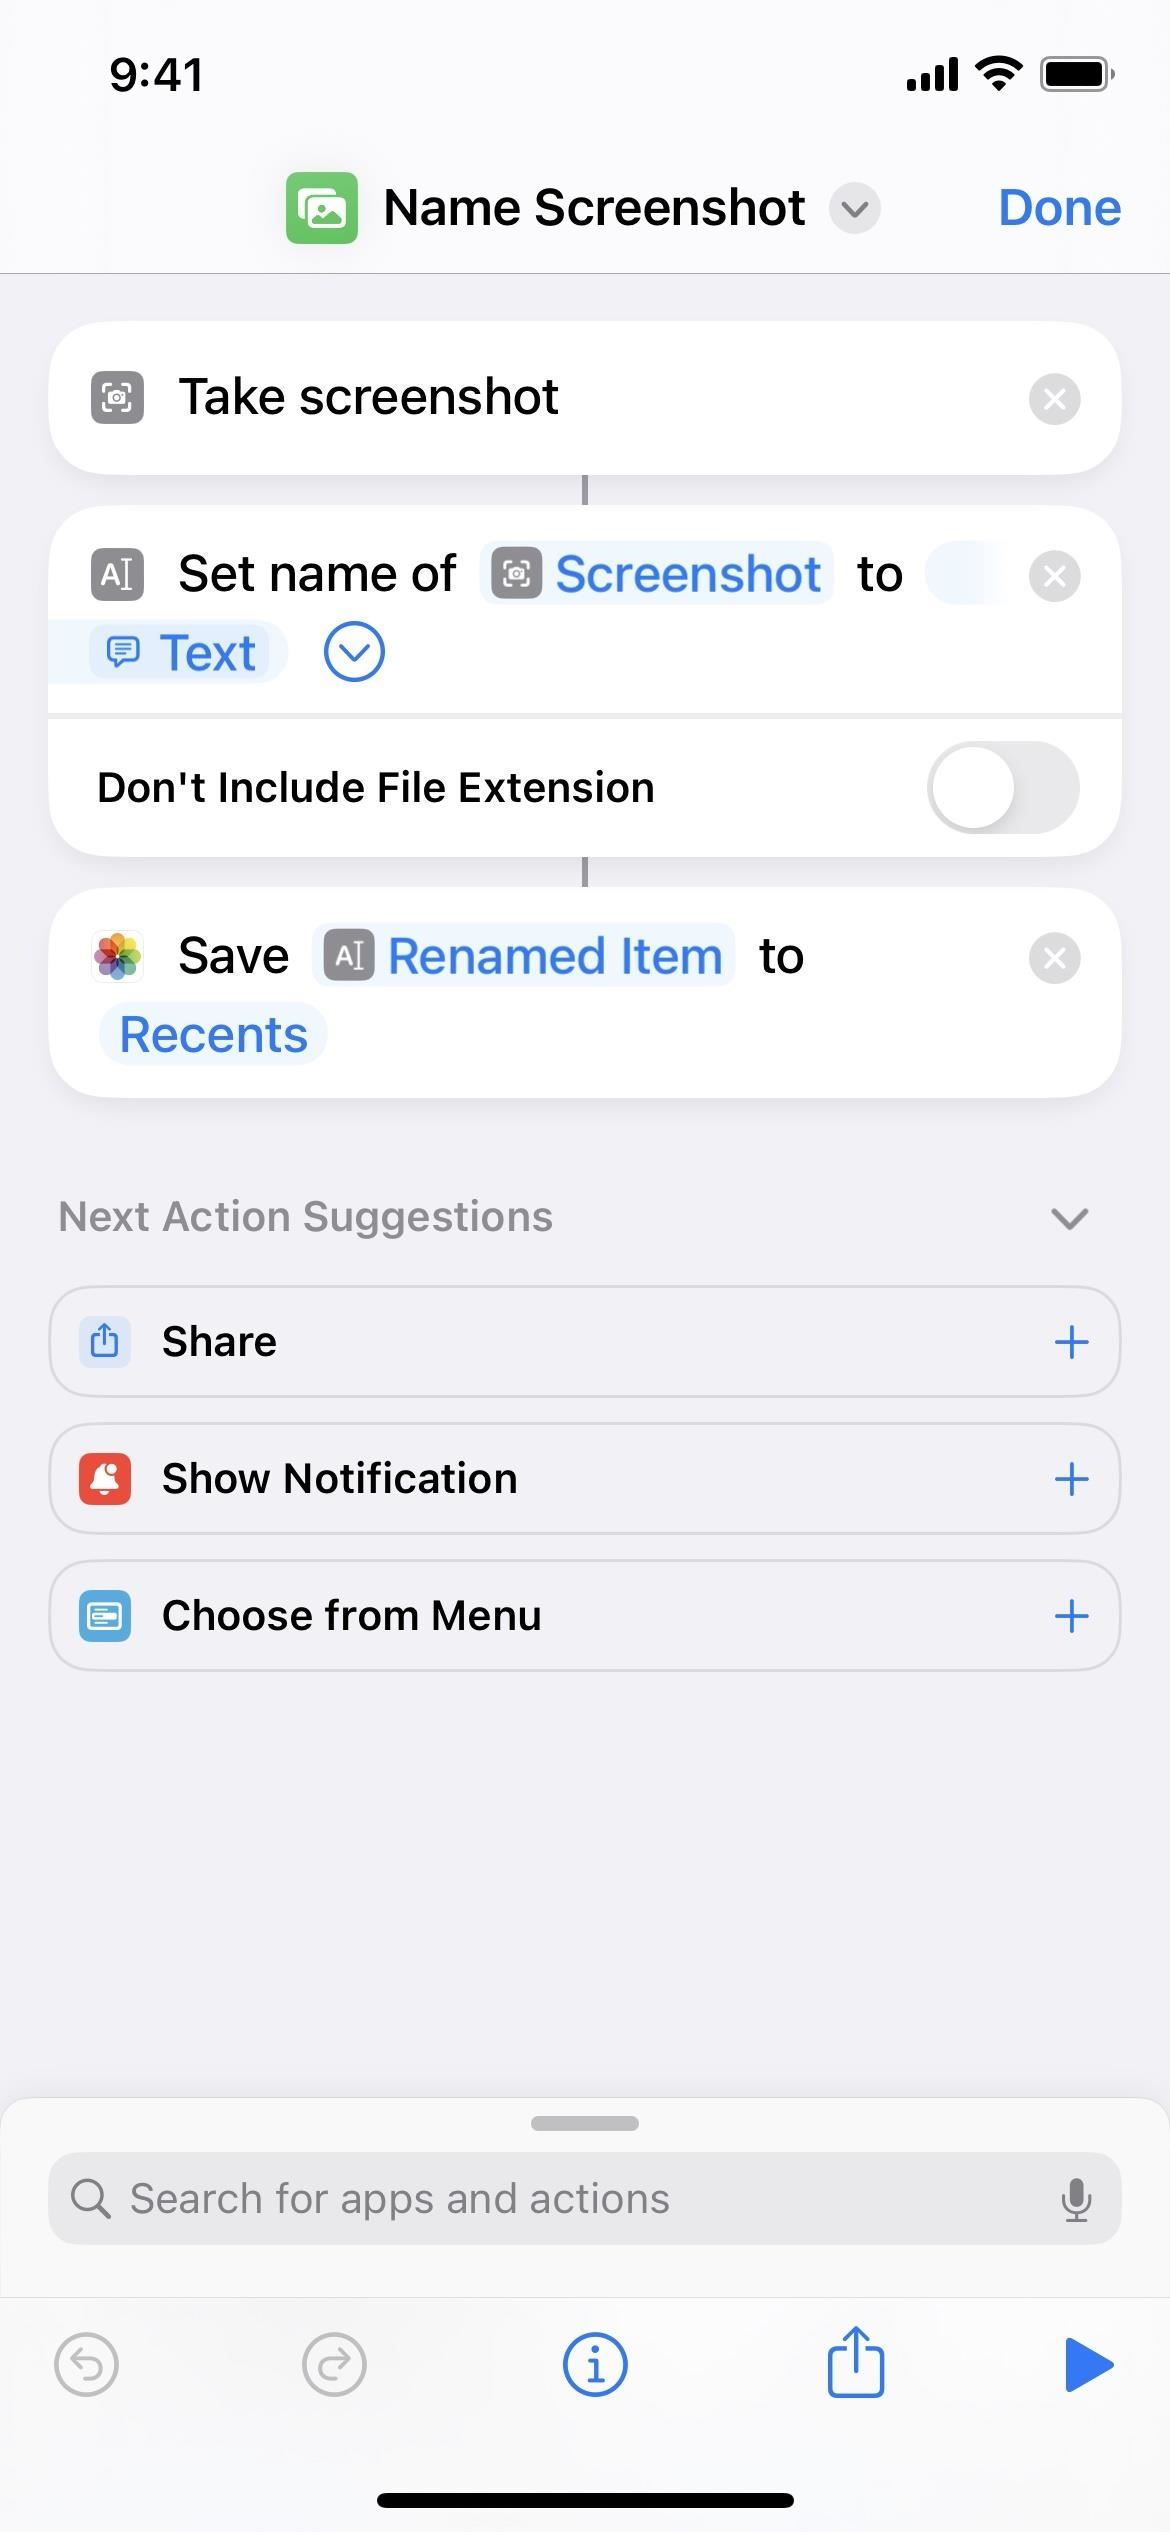 This Hack Lets You Use Custom Names for Newly Captured Screenshots on Your iPhone